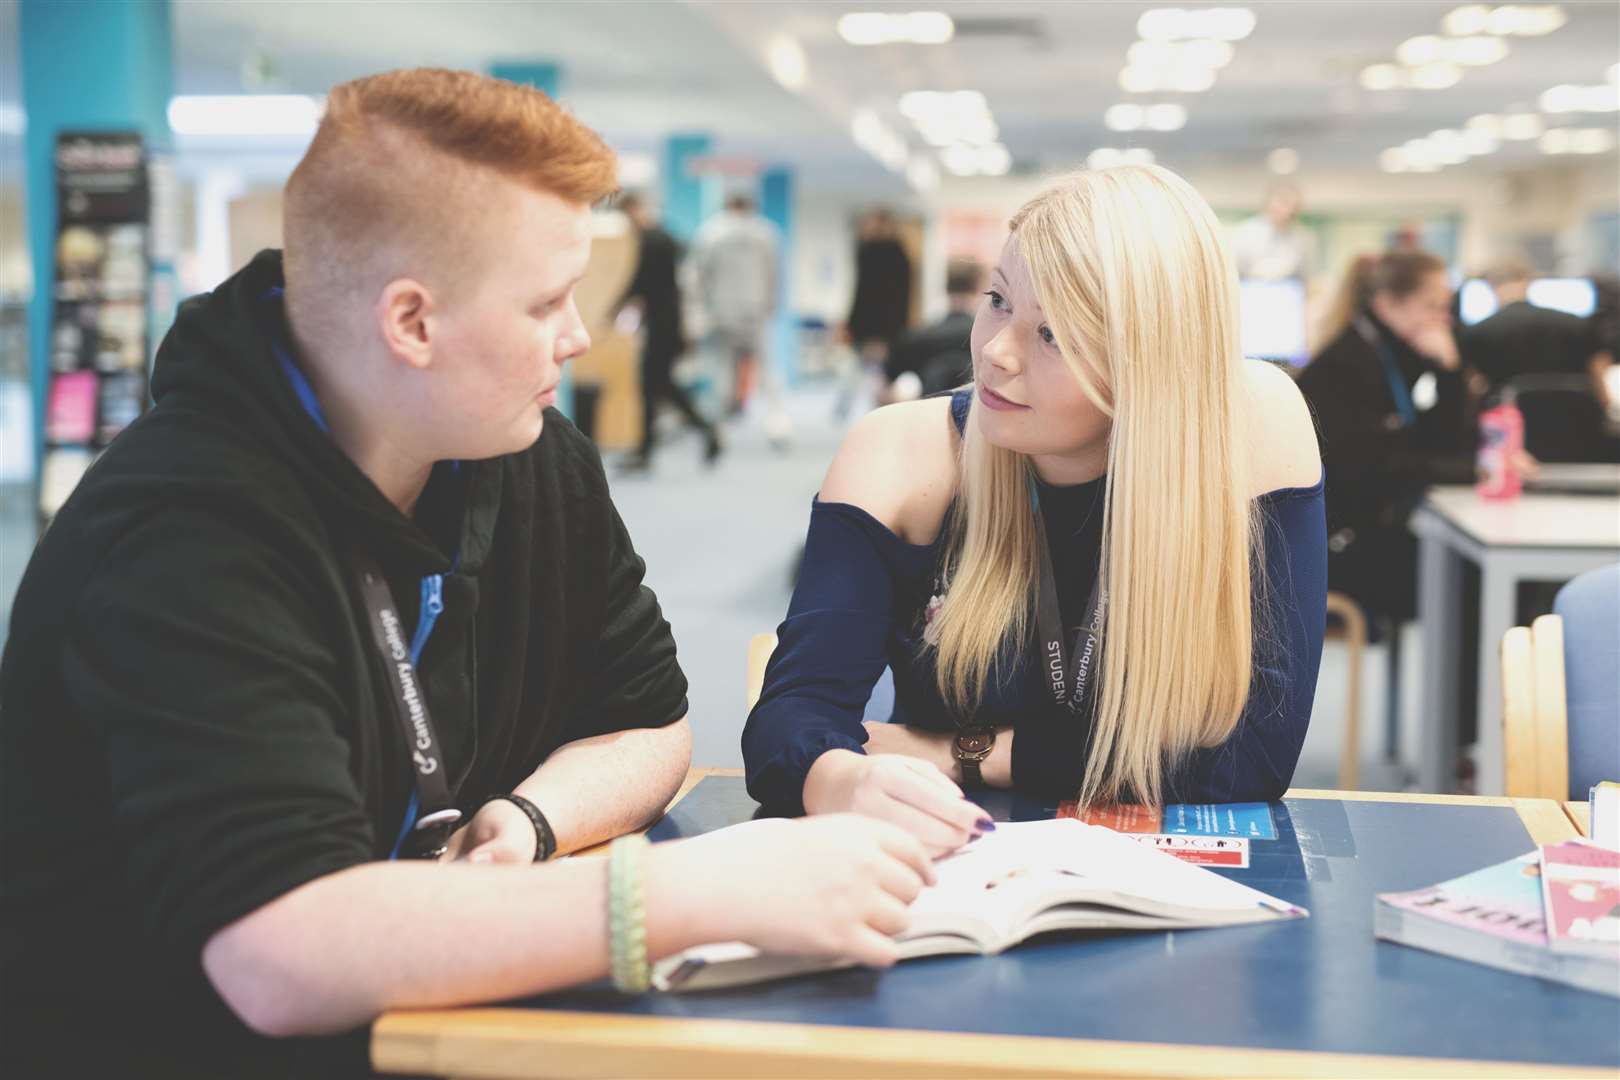 EKC Sixth Form College’s support of students is second to none